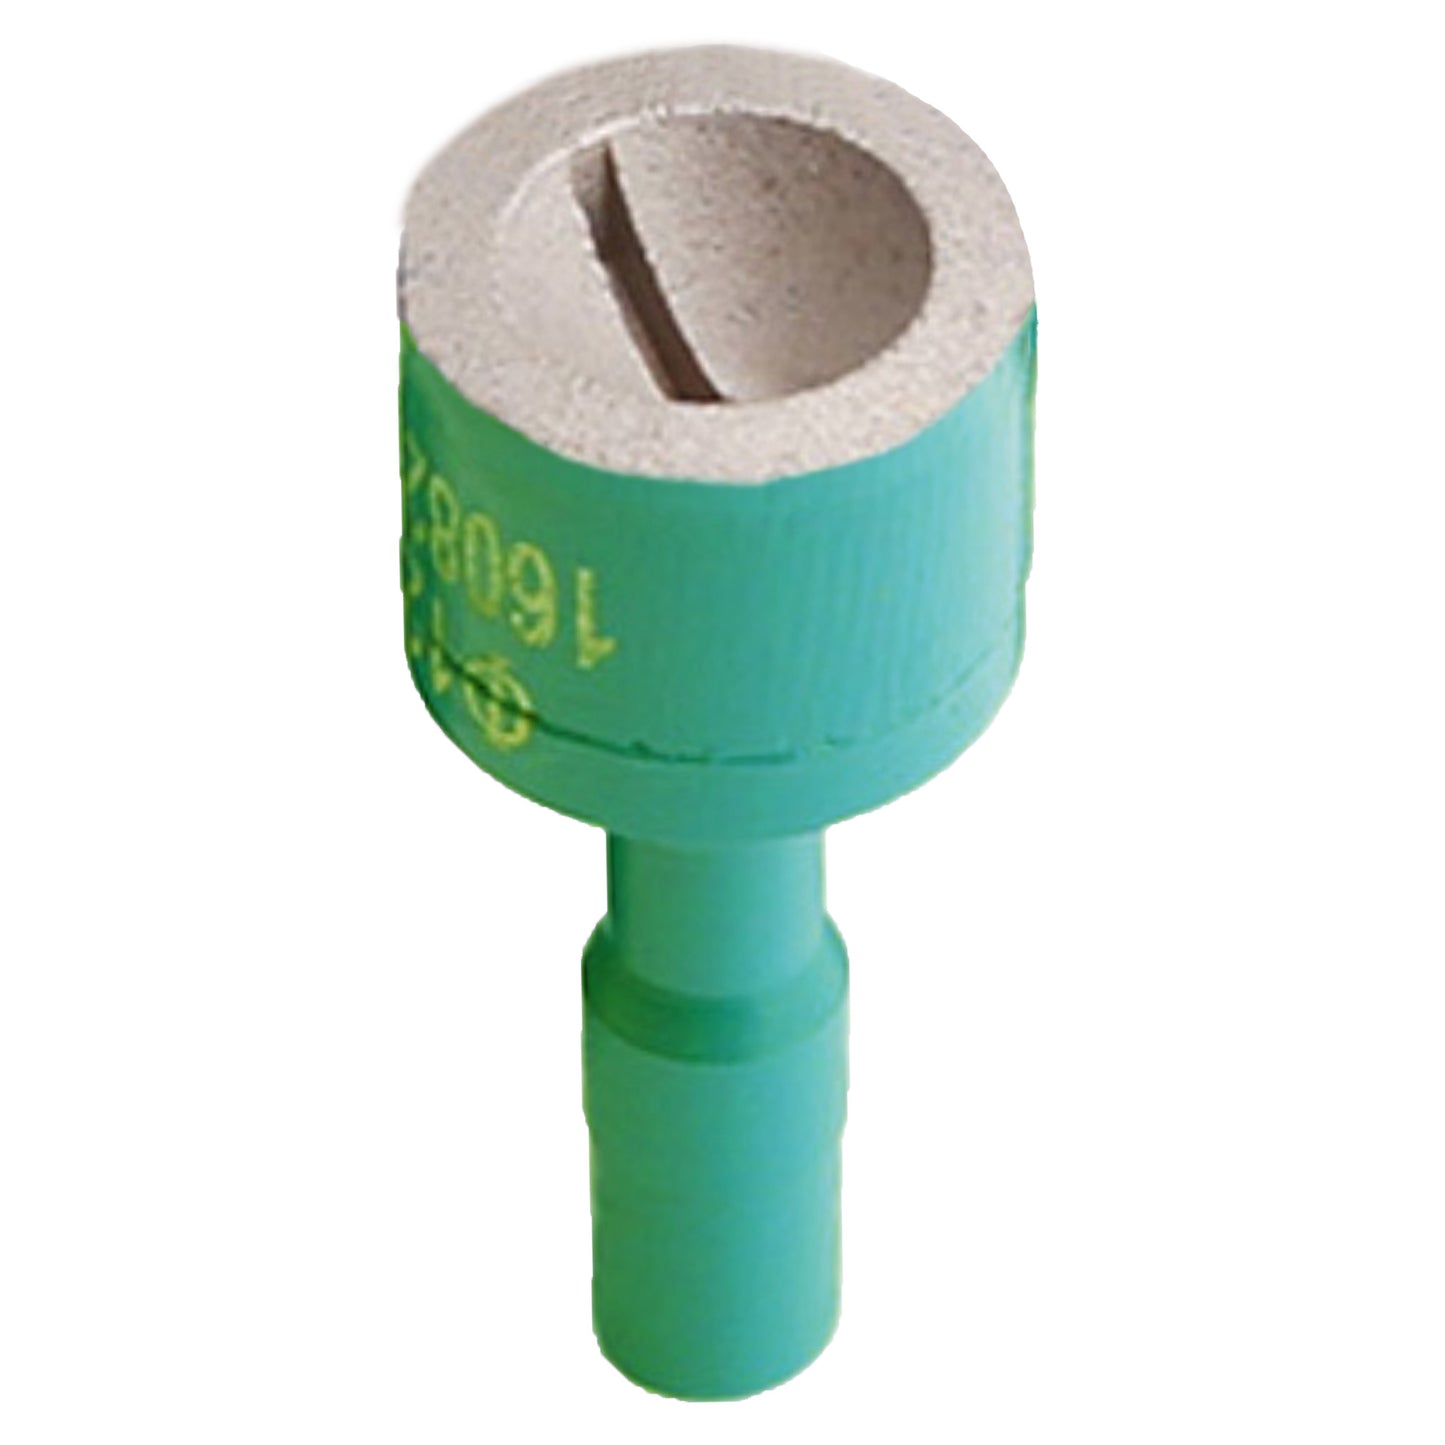 7mm - Grinding Cup